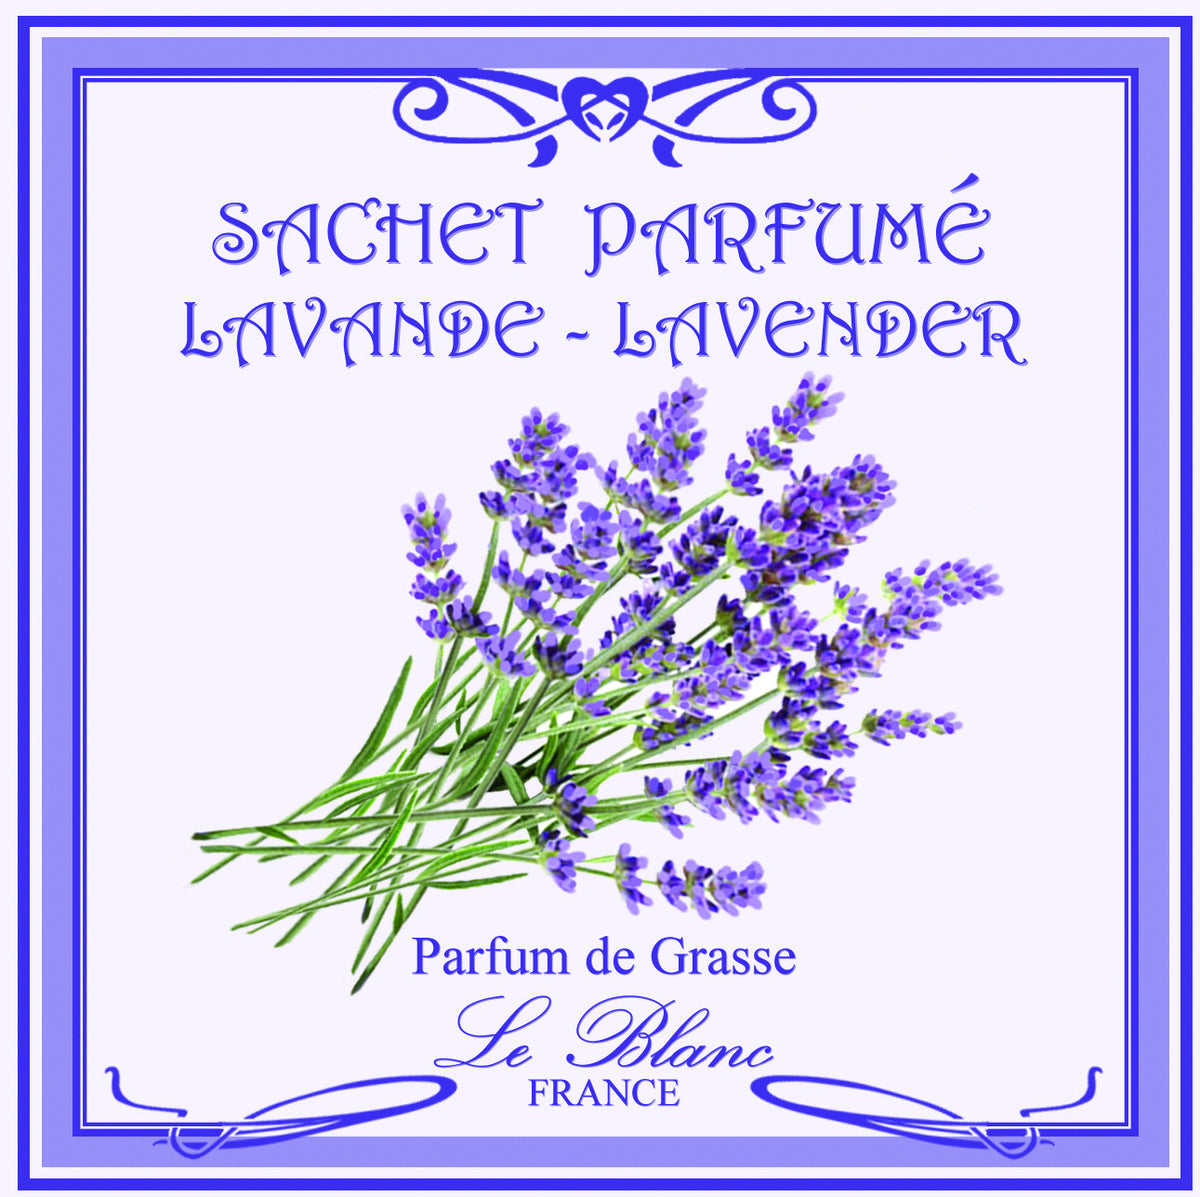 Elegant label design featuring the words "Le Blanc Lavender Scented Sachet - lavender perfume" and "parfum de grasse Le Blanc Made in France" with an illustration of fresh lavender sprigs against a.